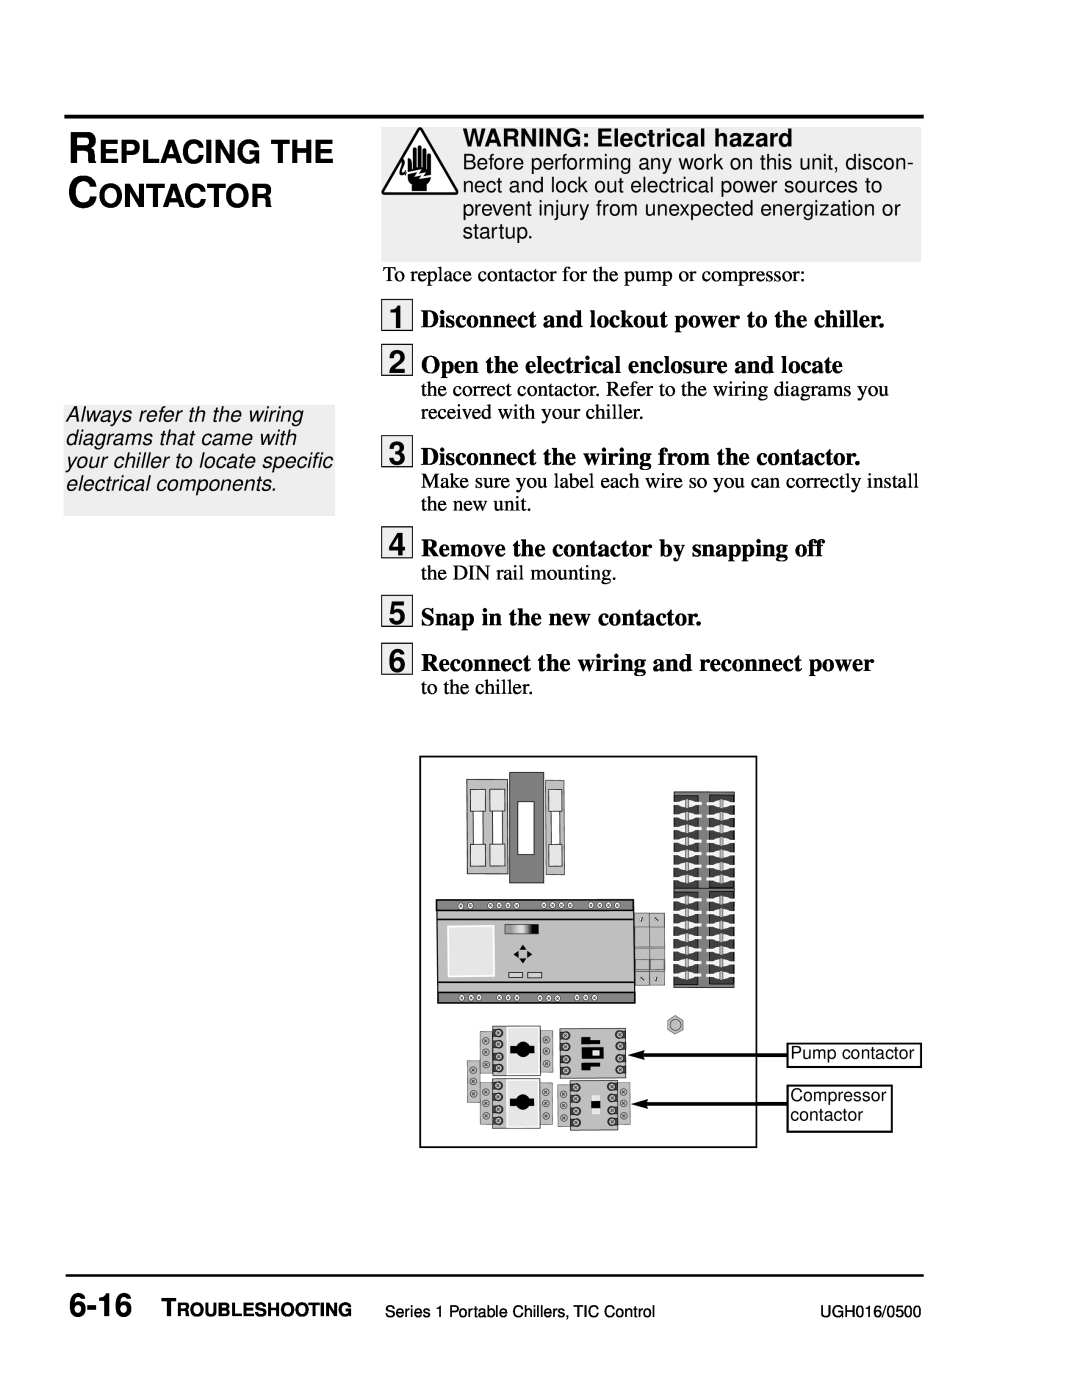 Conair UGH016/0500 manual Replacing The Contactor, WARNING Electrical hazard, Disconnect and lockout power to the chiller 